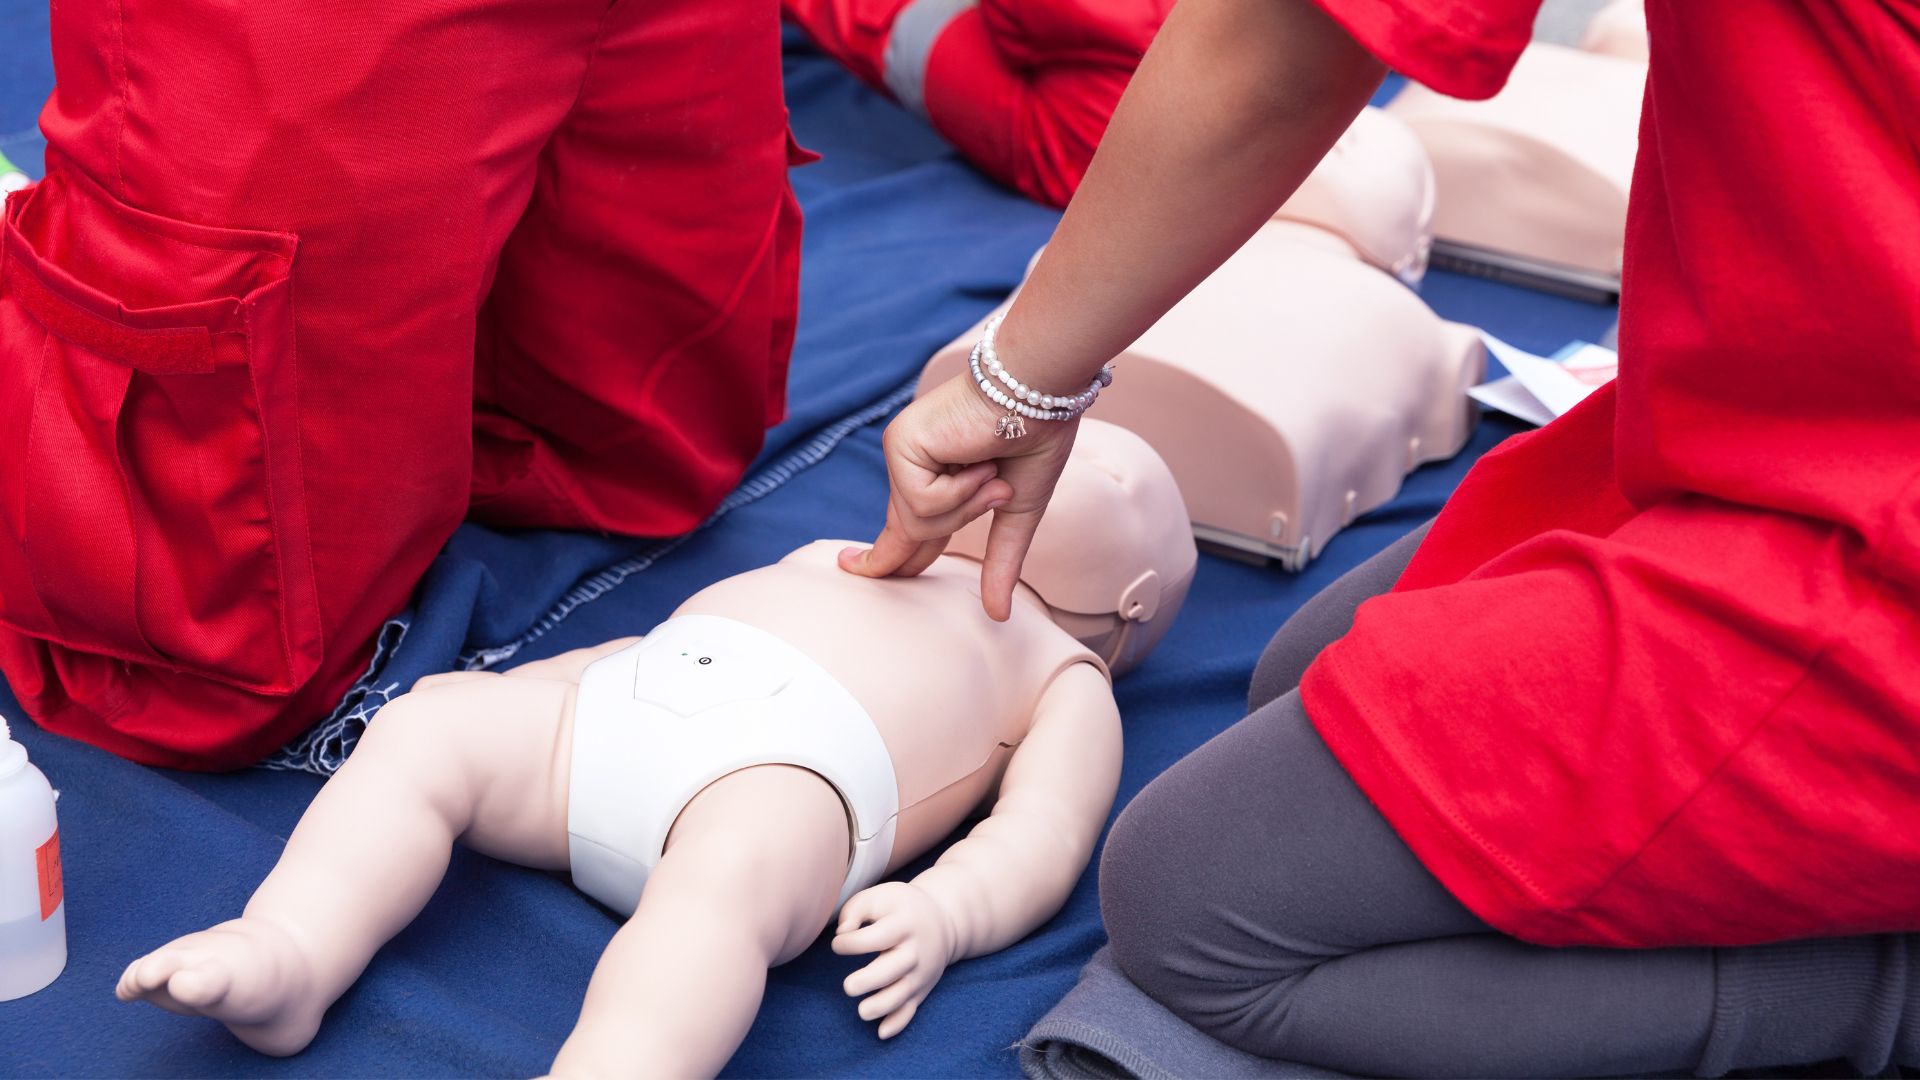 CPR Training for Parents in Jacksonville: Protecting Your Family's Safety